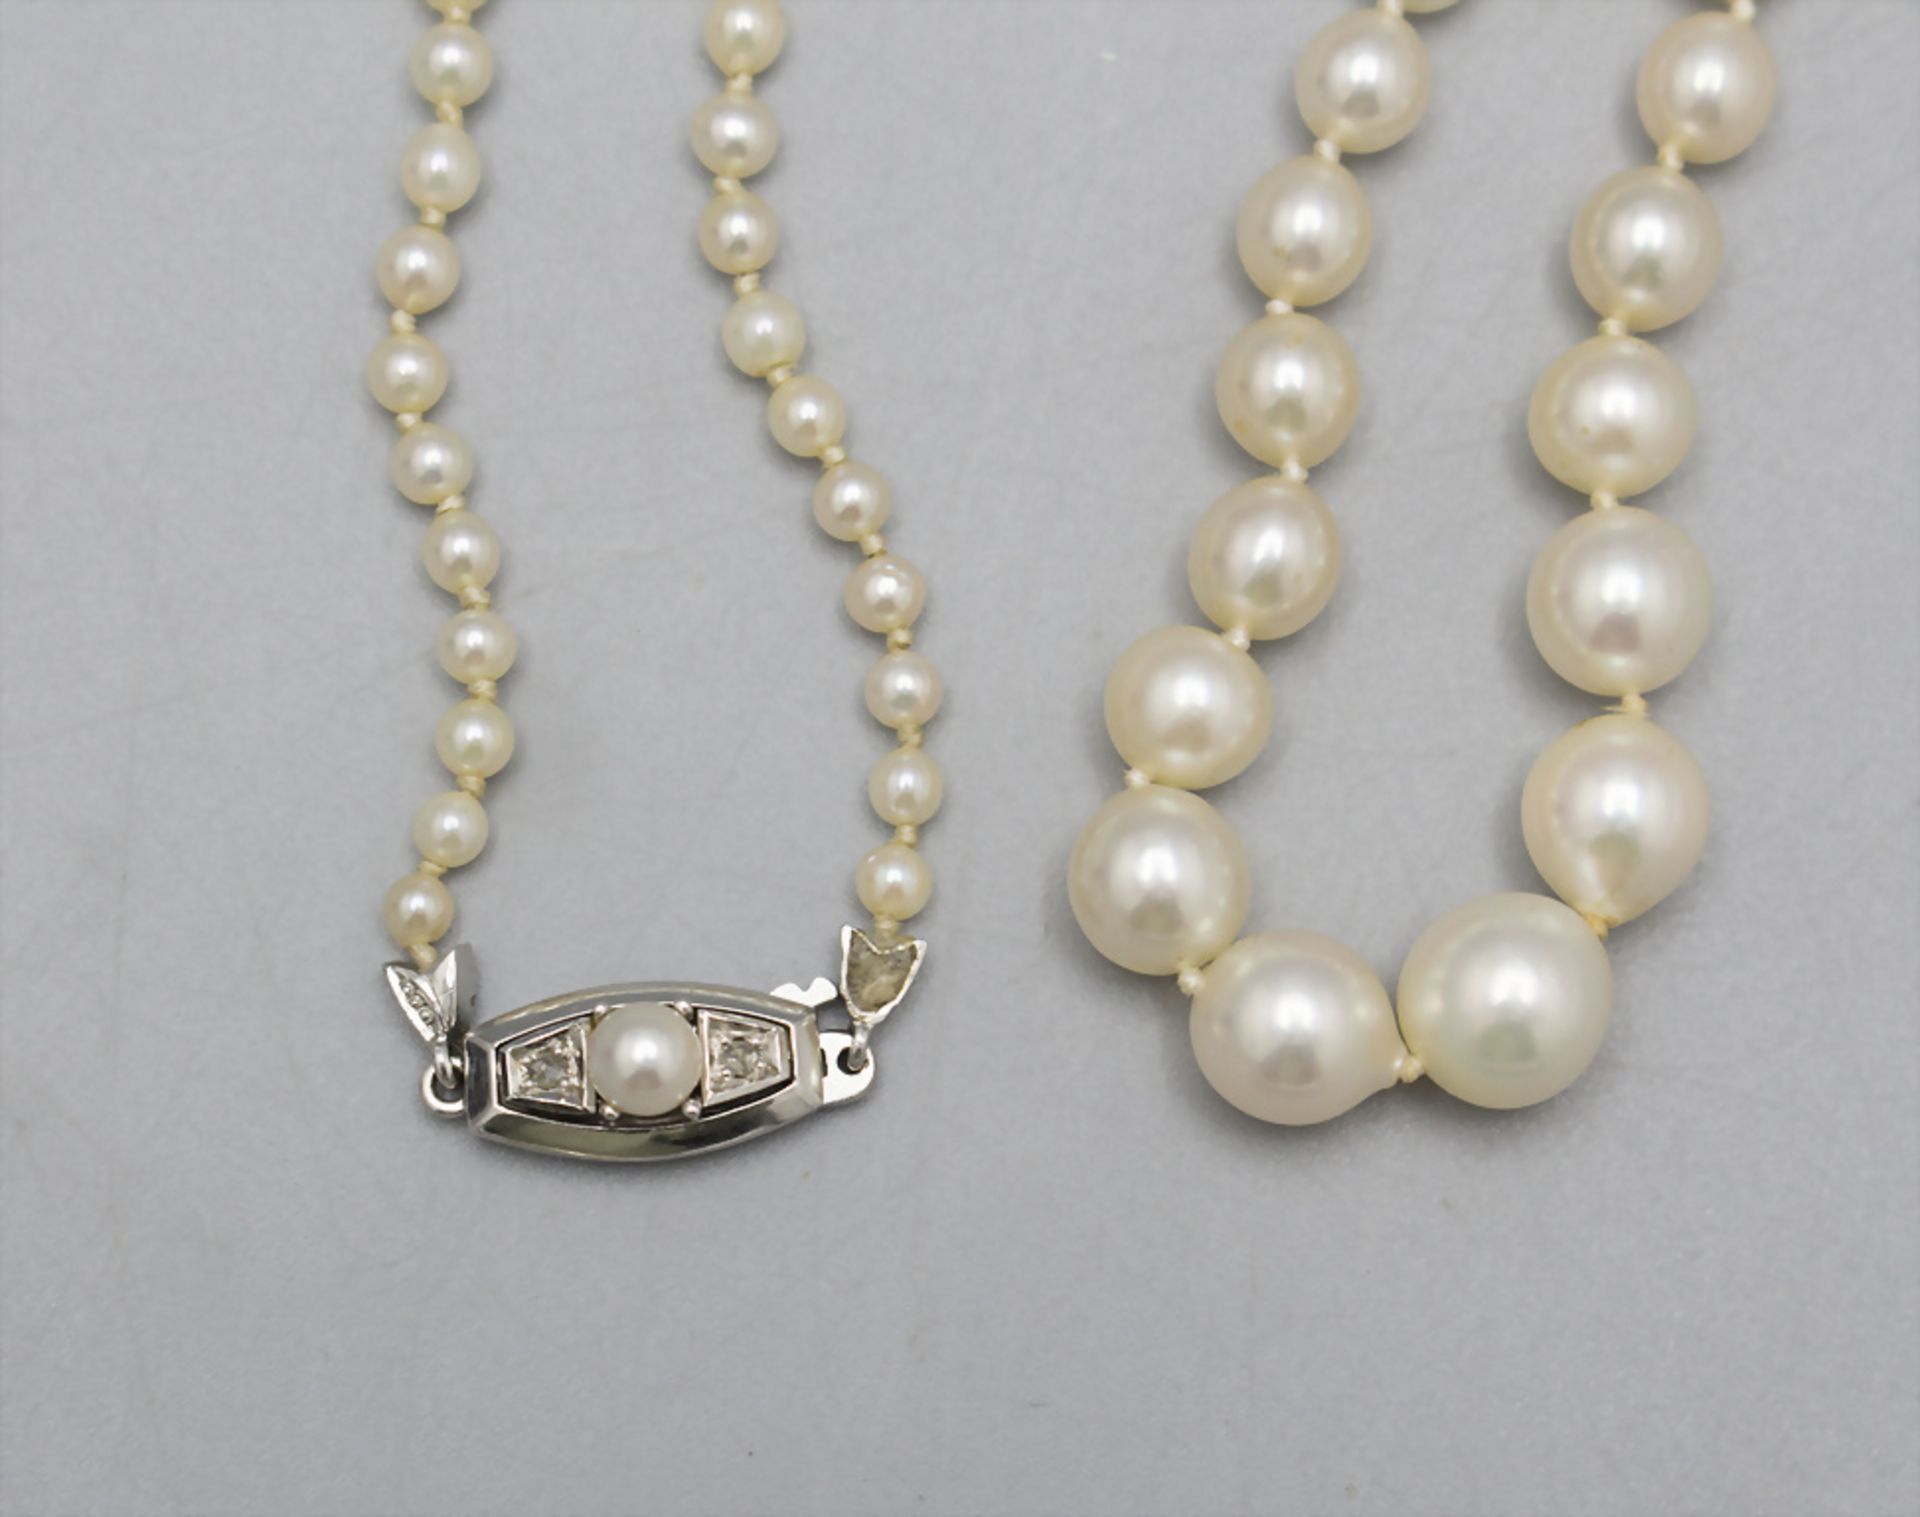 Perlenkette / A pearl necklace, 19. Jh. - Image 2 of 3